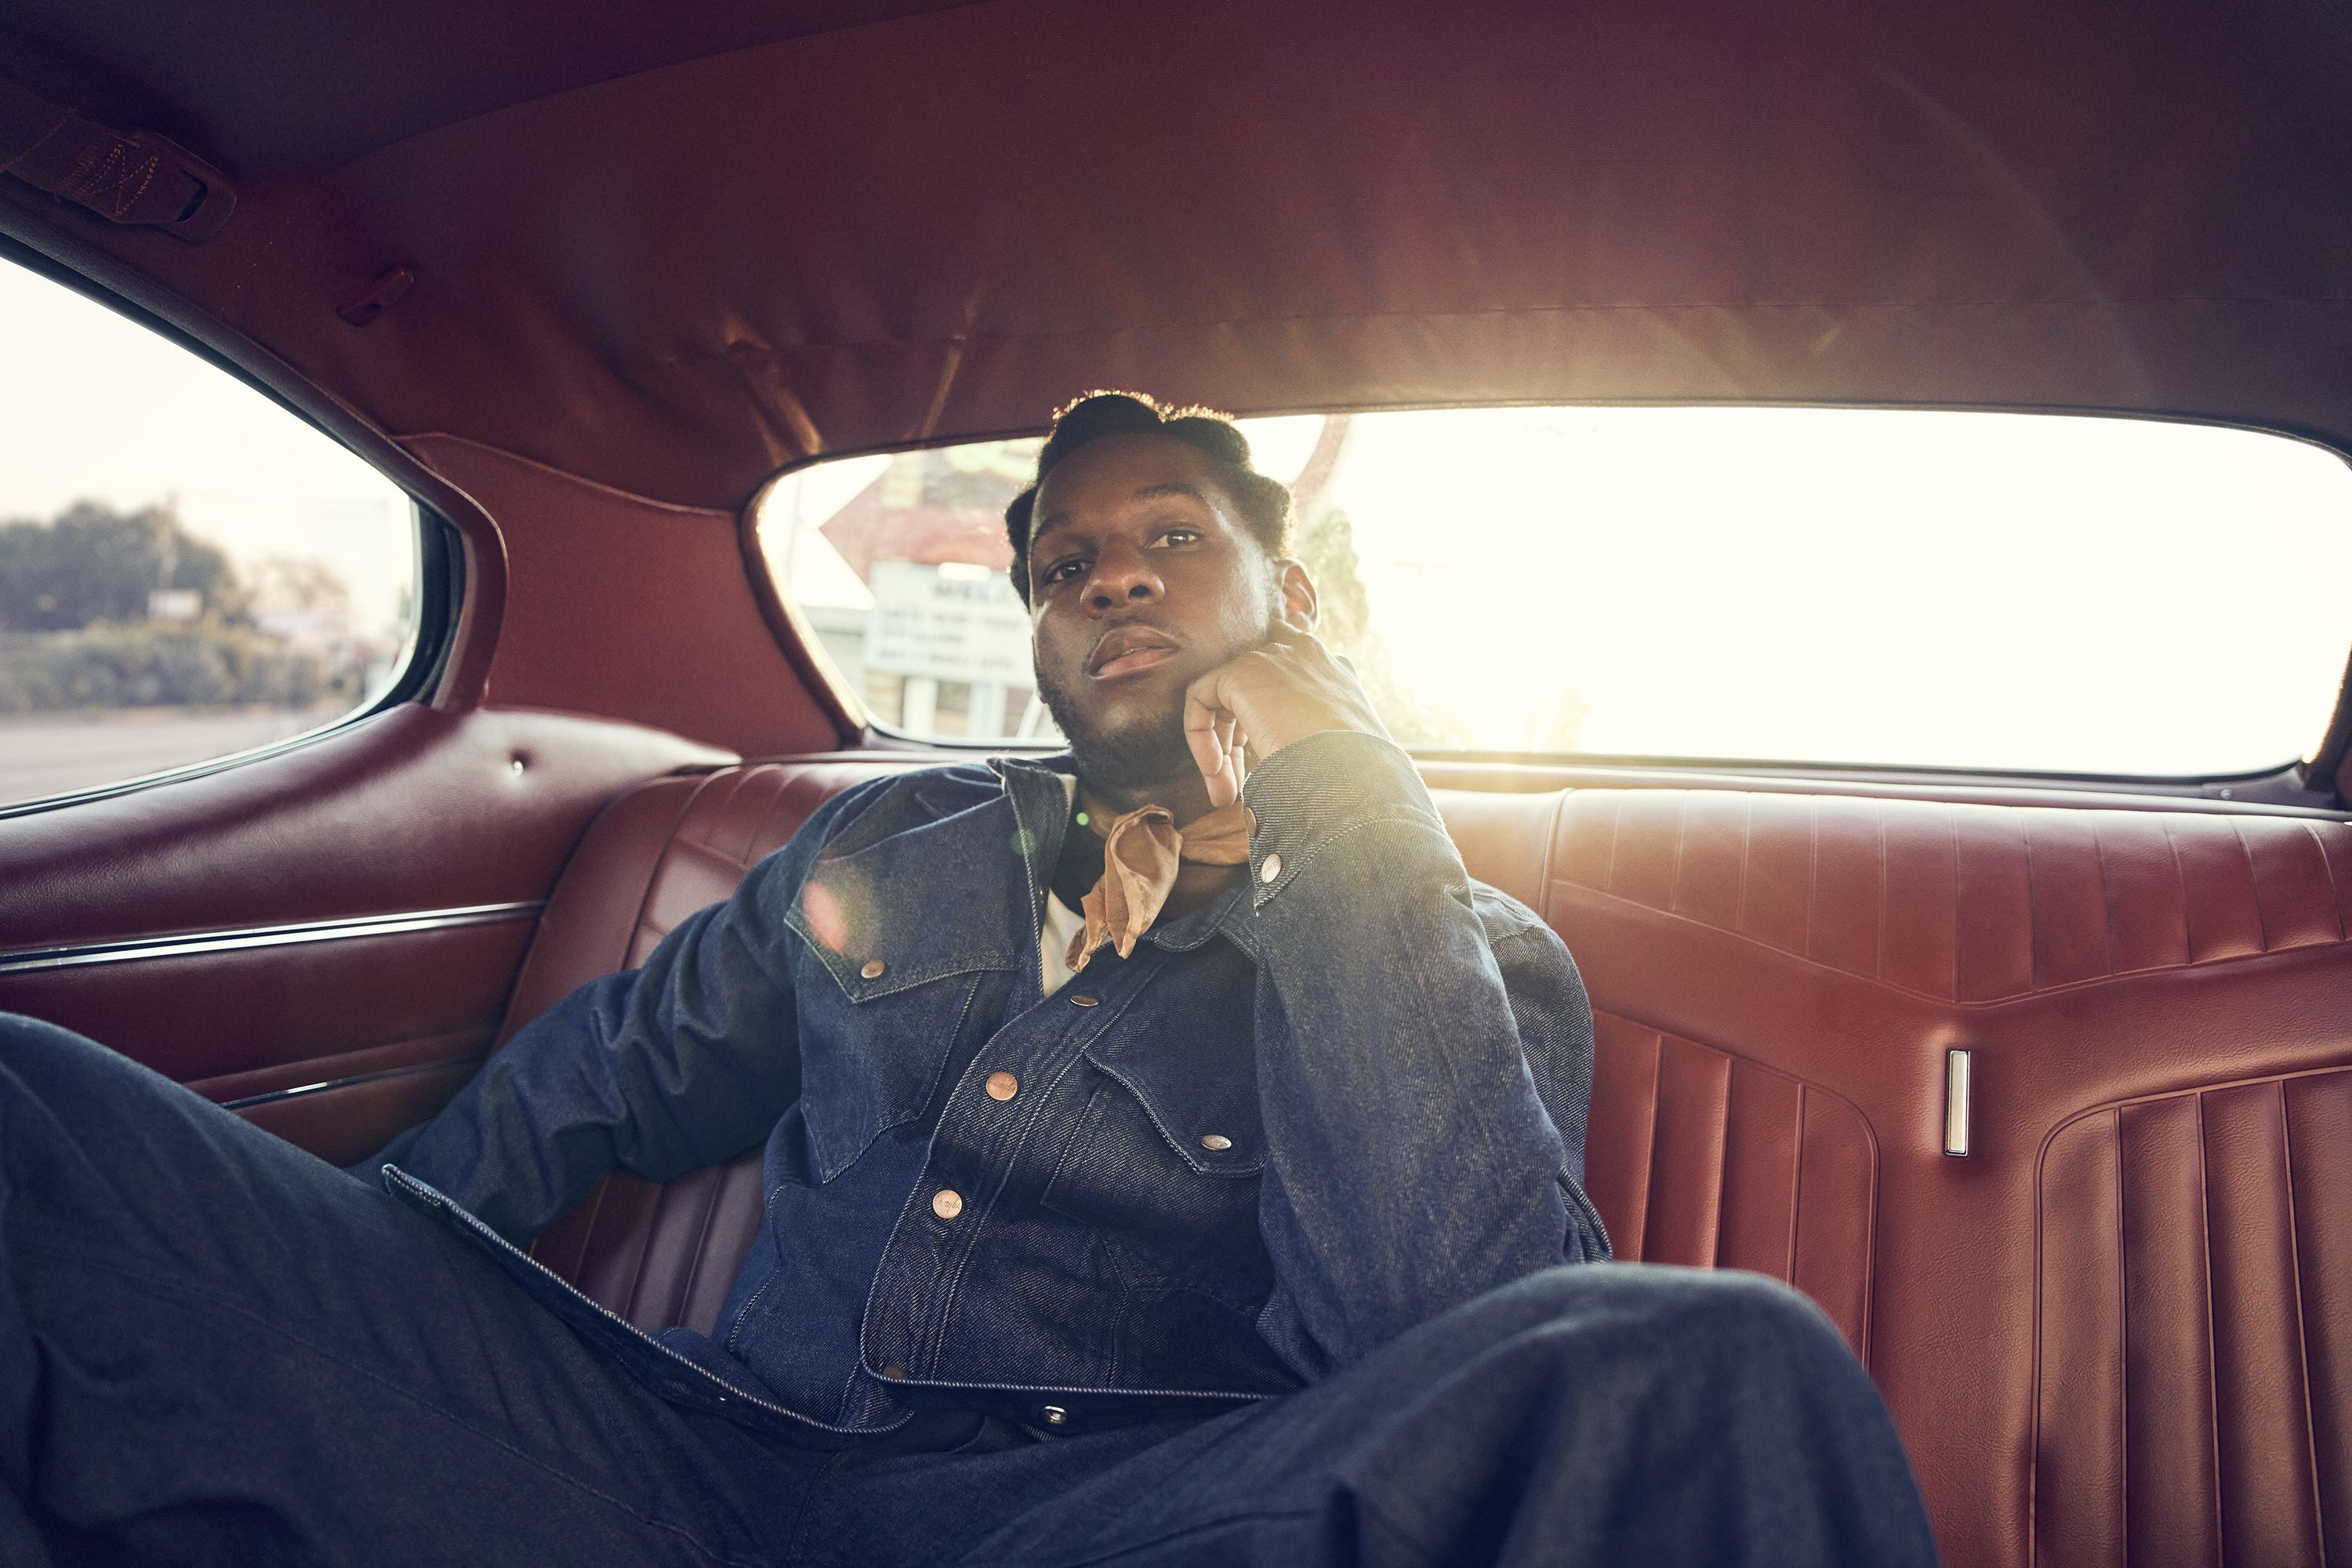 Wrangler x Leon Bridges Collaboration Review, Prices, and Where to Buy